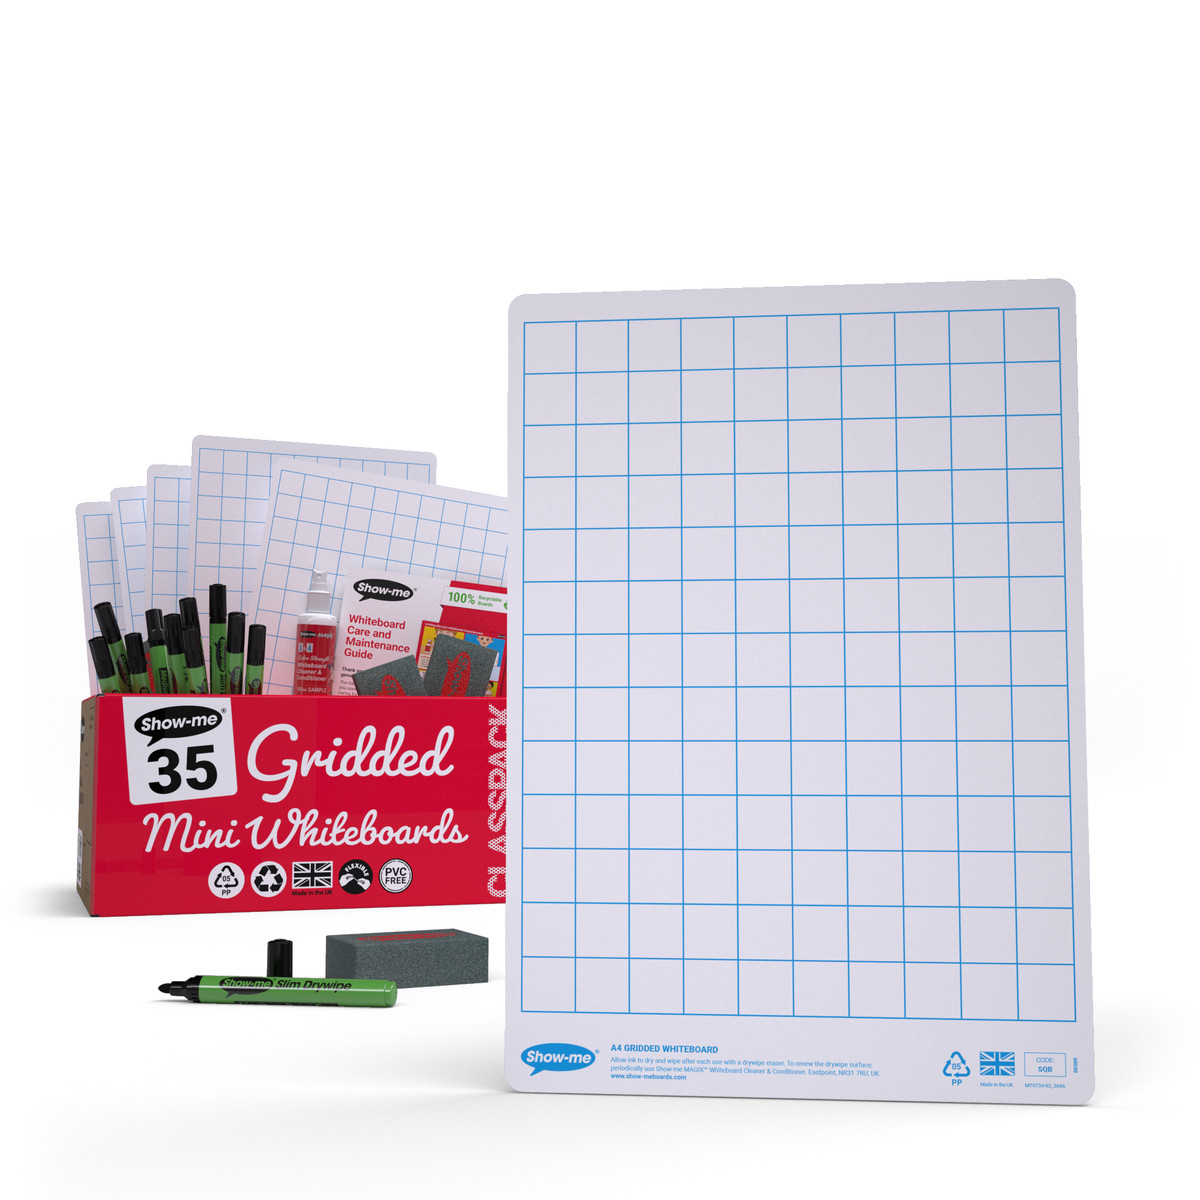 A4 Gridded Mini Whiteboards